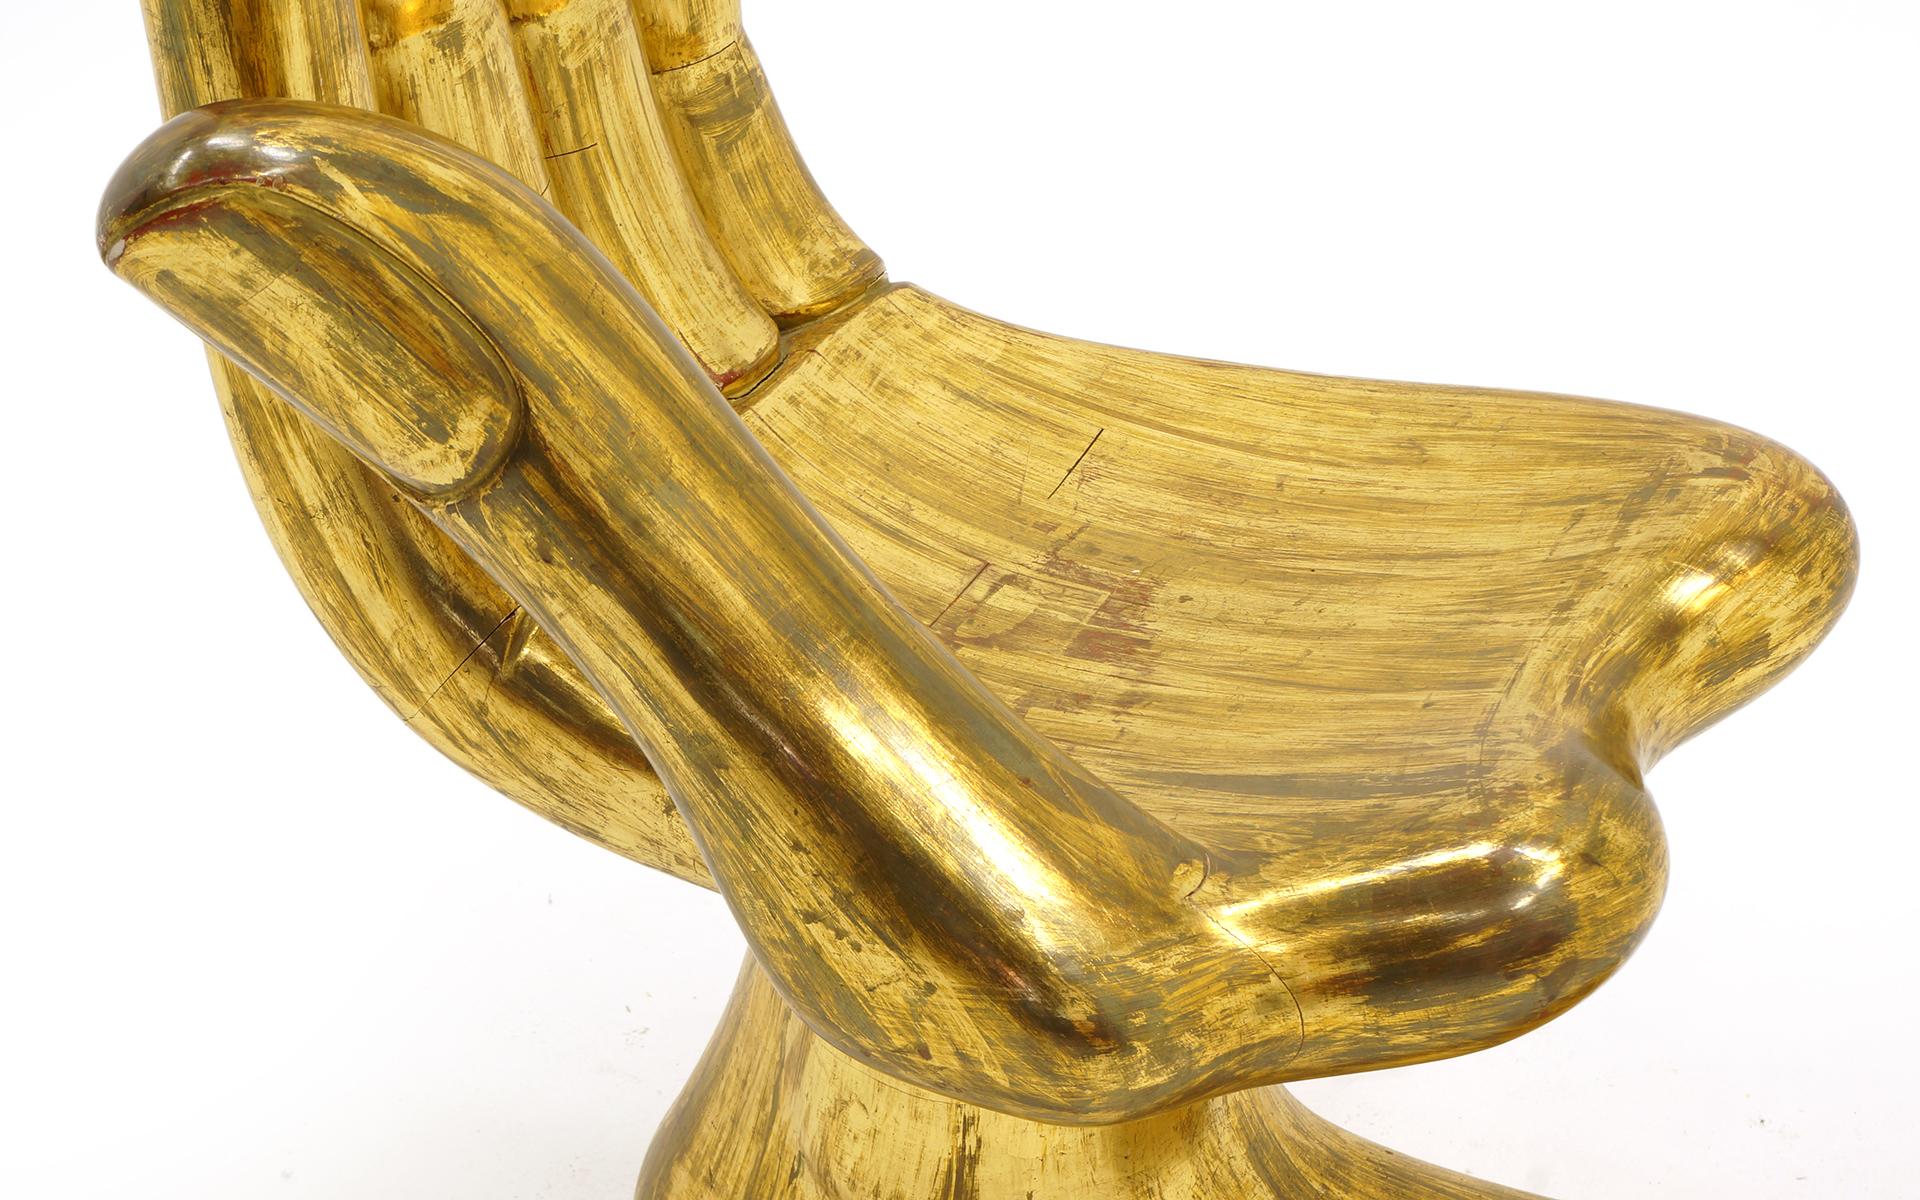 Mexican Pedro Friedeberg Hand Foot Chair, Original Gold Leaf Finish, Signed, 1960s